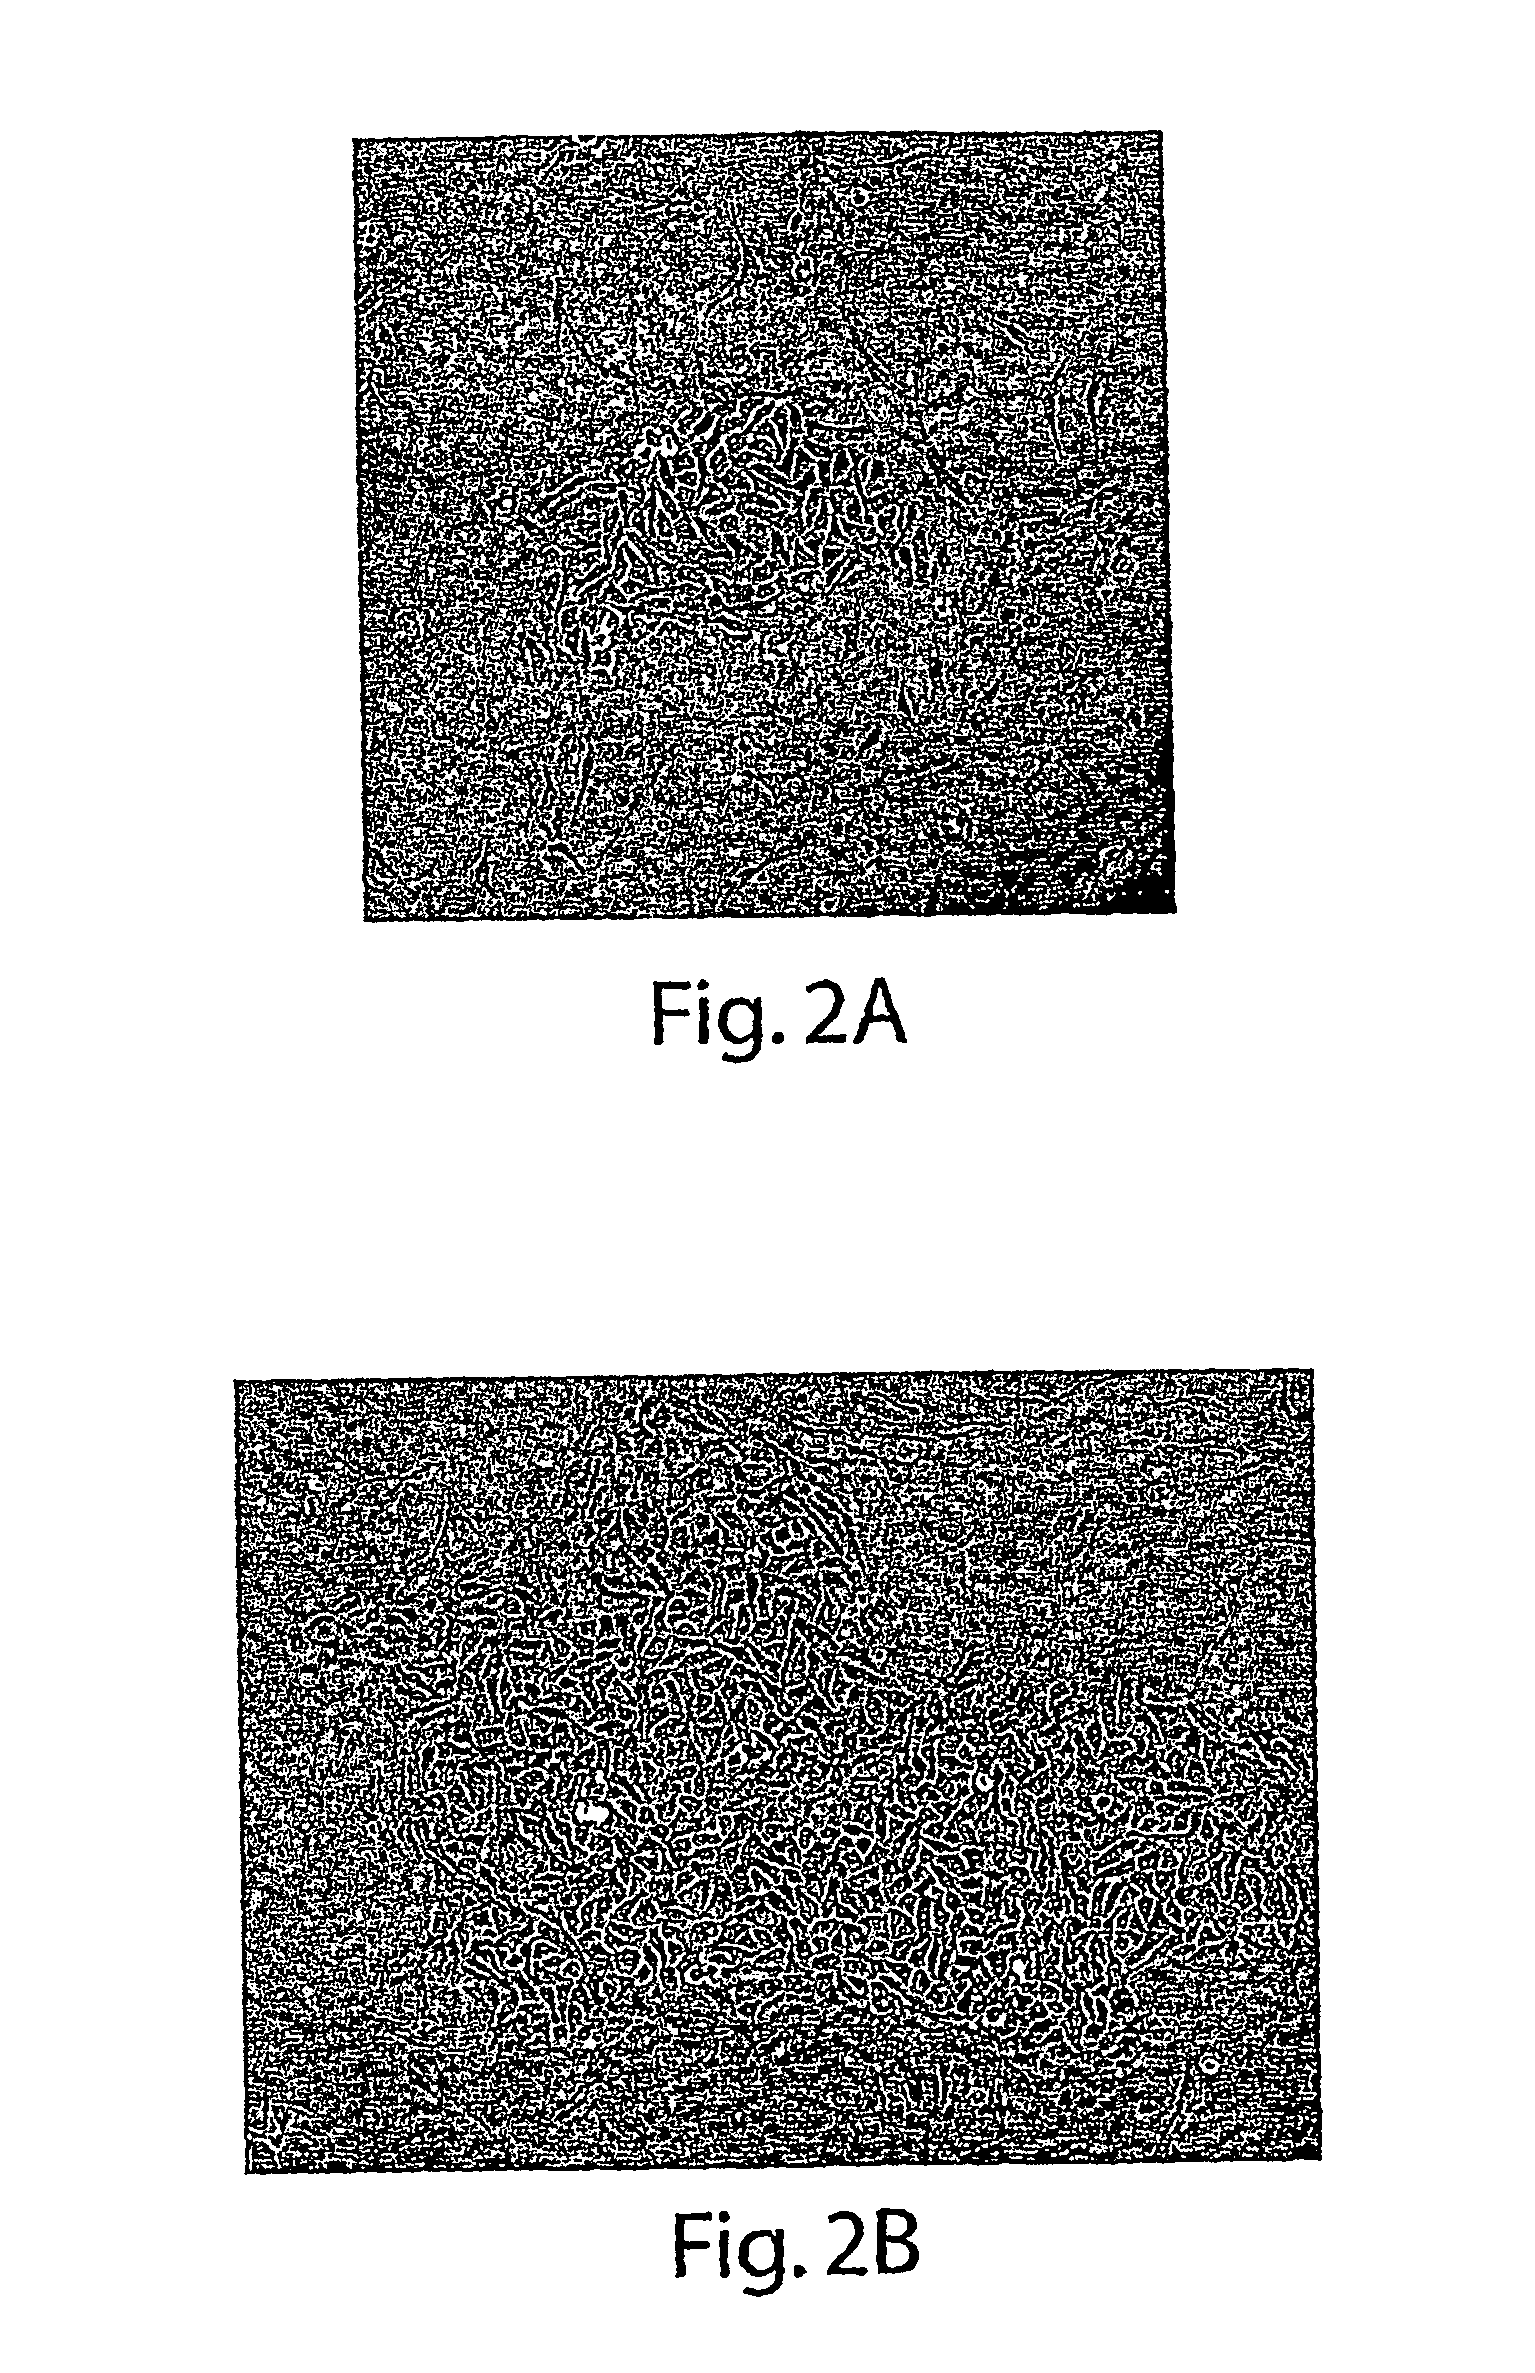 Methods for Culturing Keratinocytes from Human Embryonic Stem Cells